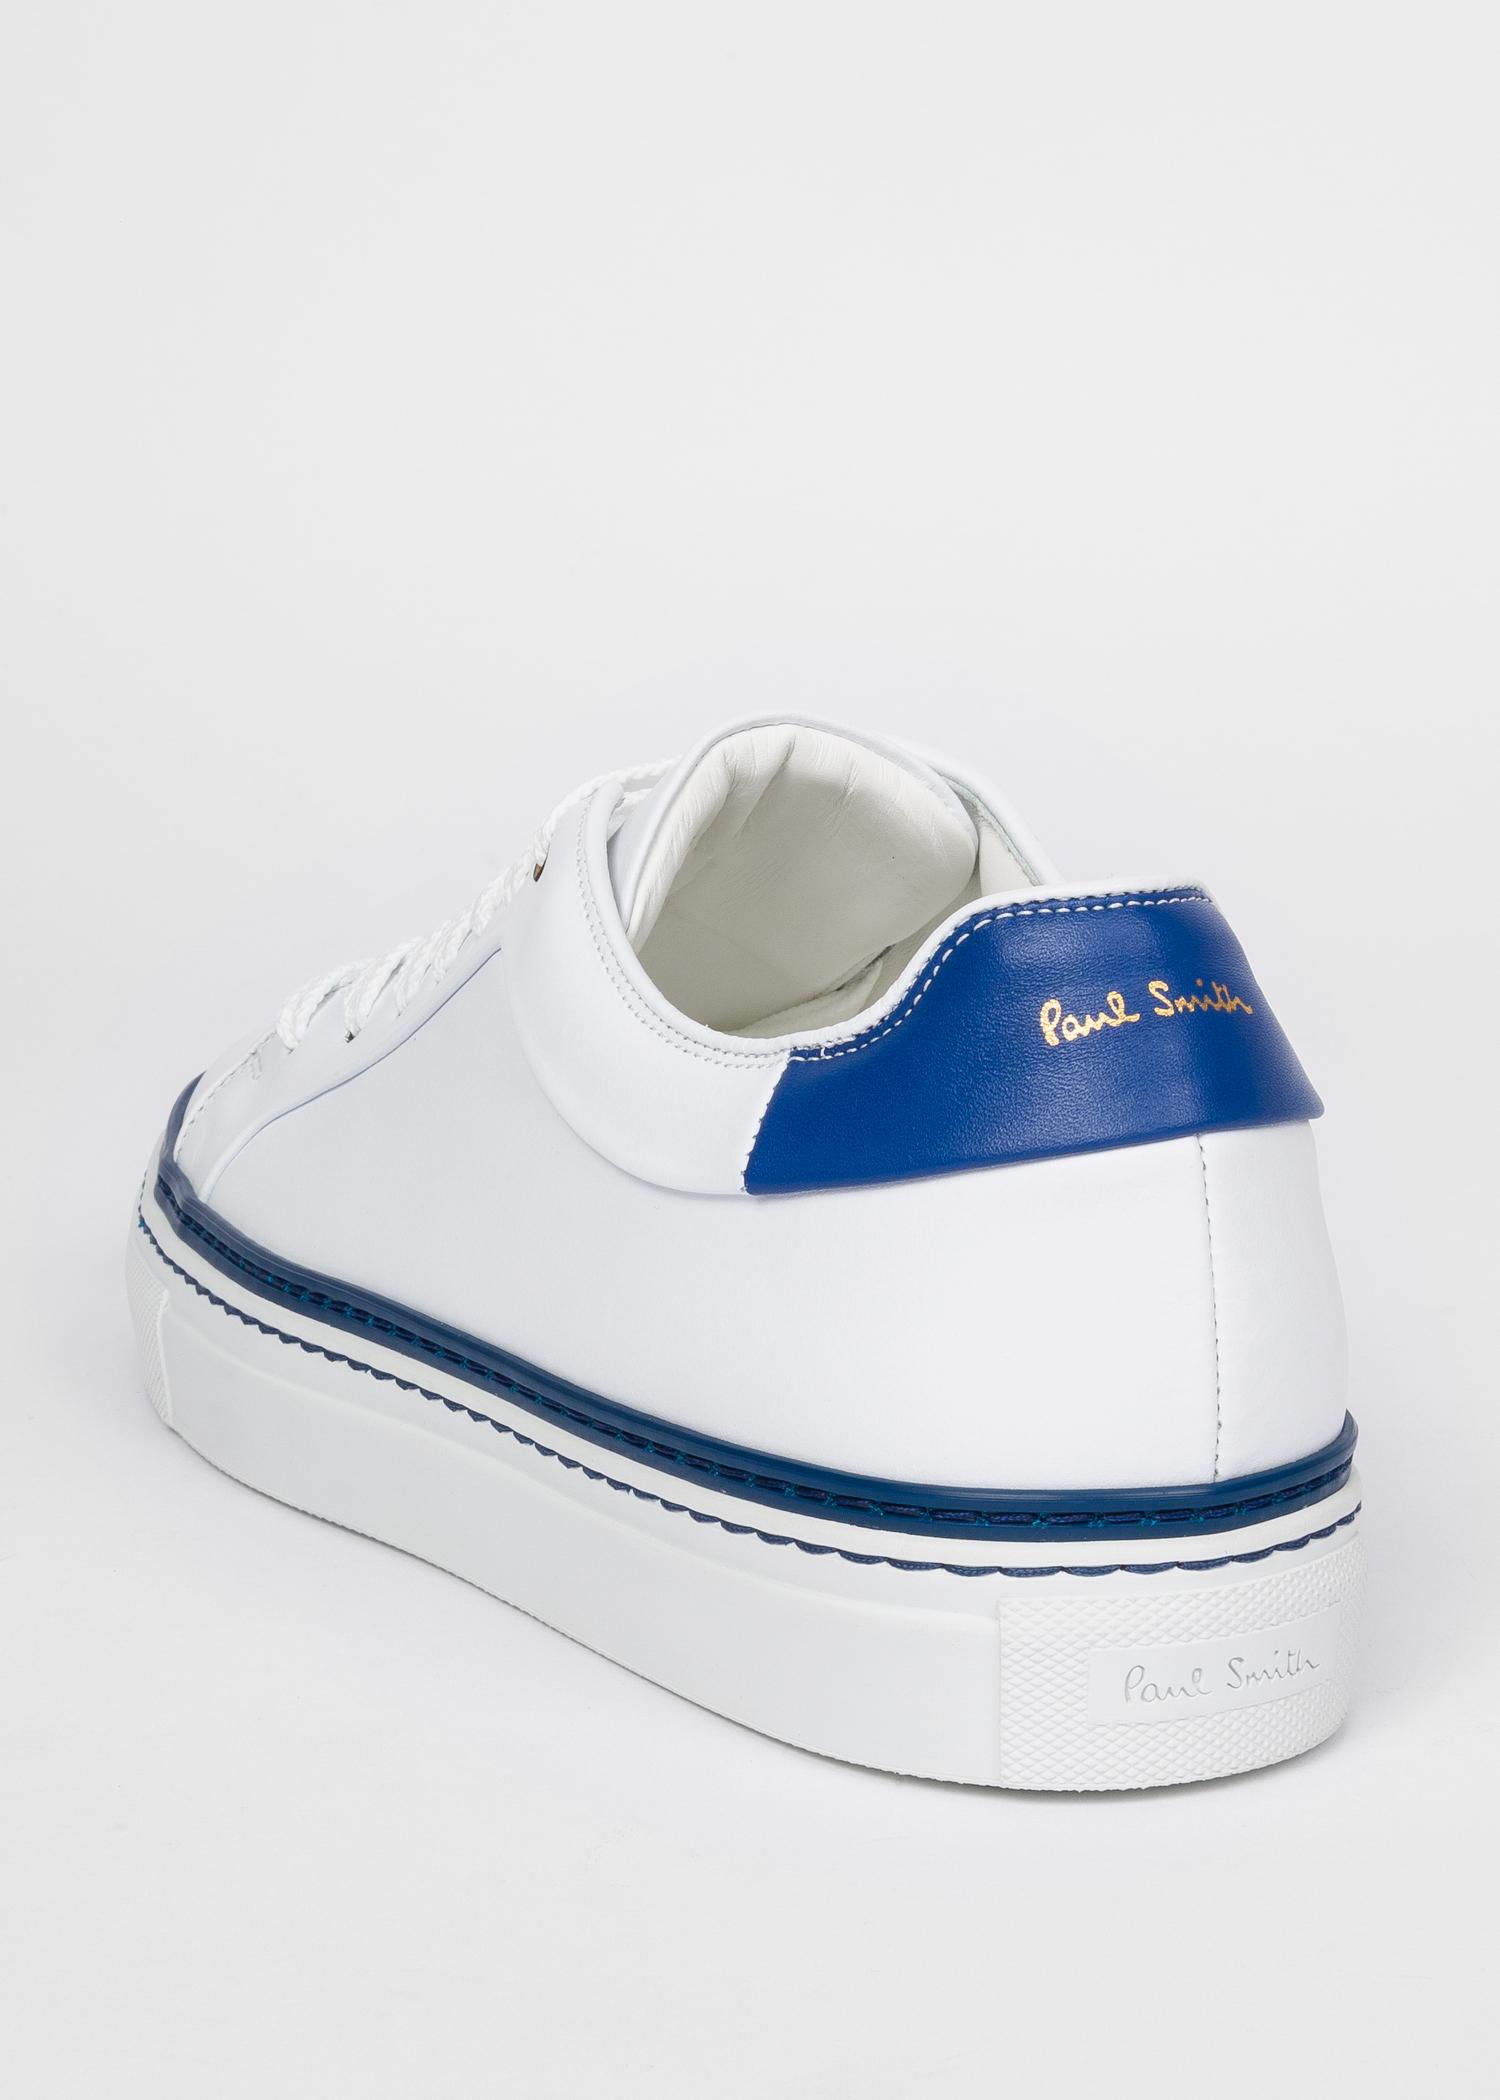 Paul Smith White Leather 'basso' Trainers With Blue Details for Men - Lyst